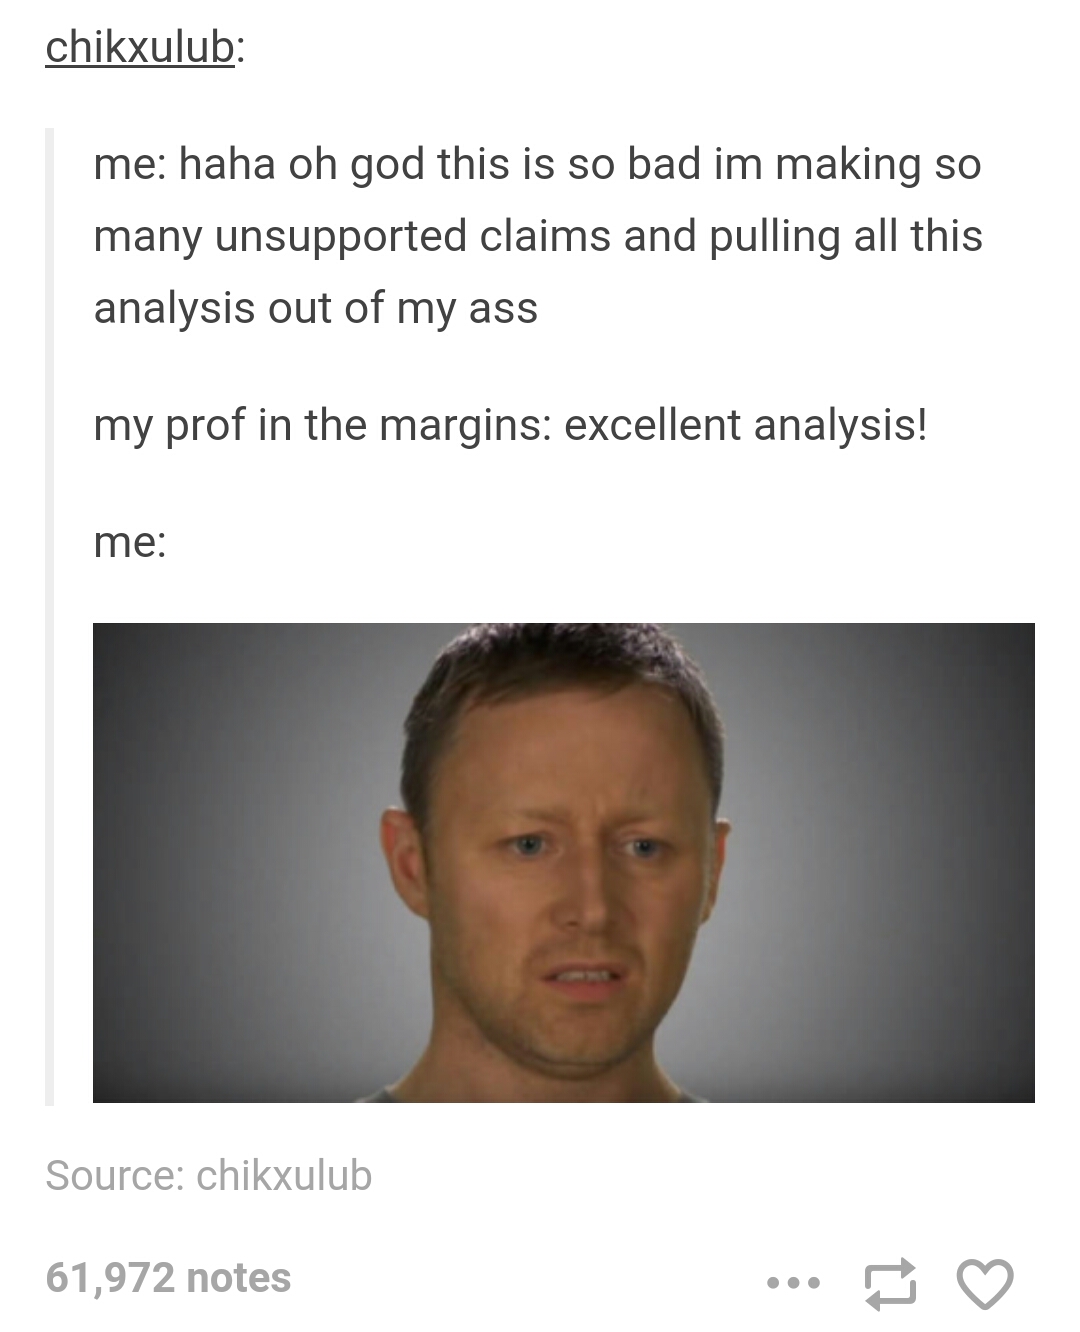 tumblr - jaw - chikxulub me haha oh god this is so bad im making so many unsupported claims and pulling all this analysis out of my ass my prof in the margins excellent analysis! me Source chikxulub 61,972 notes